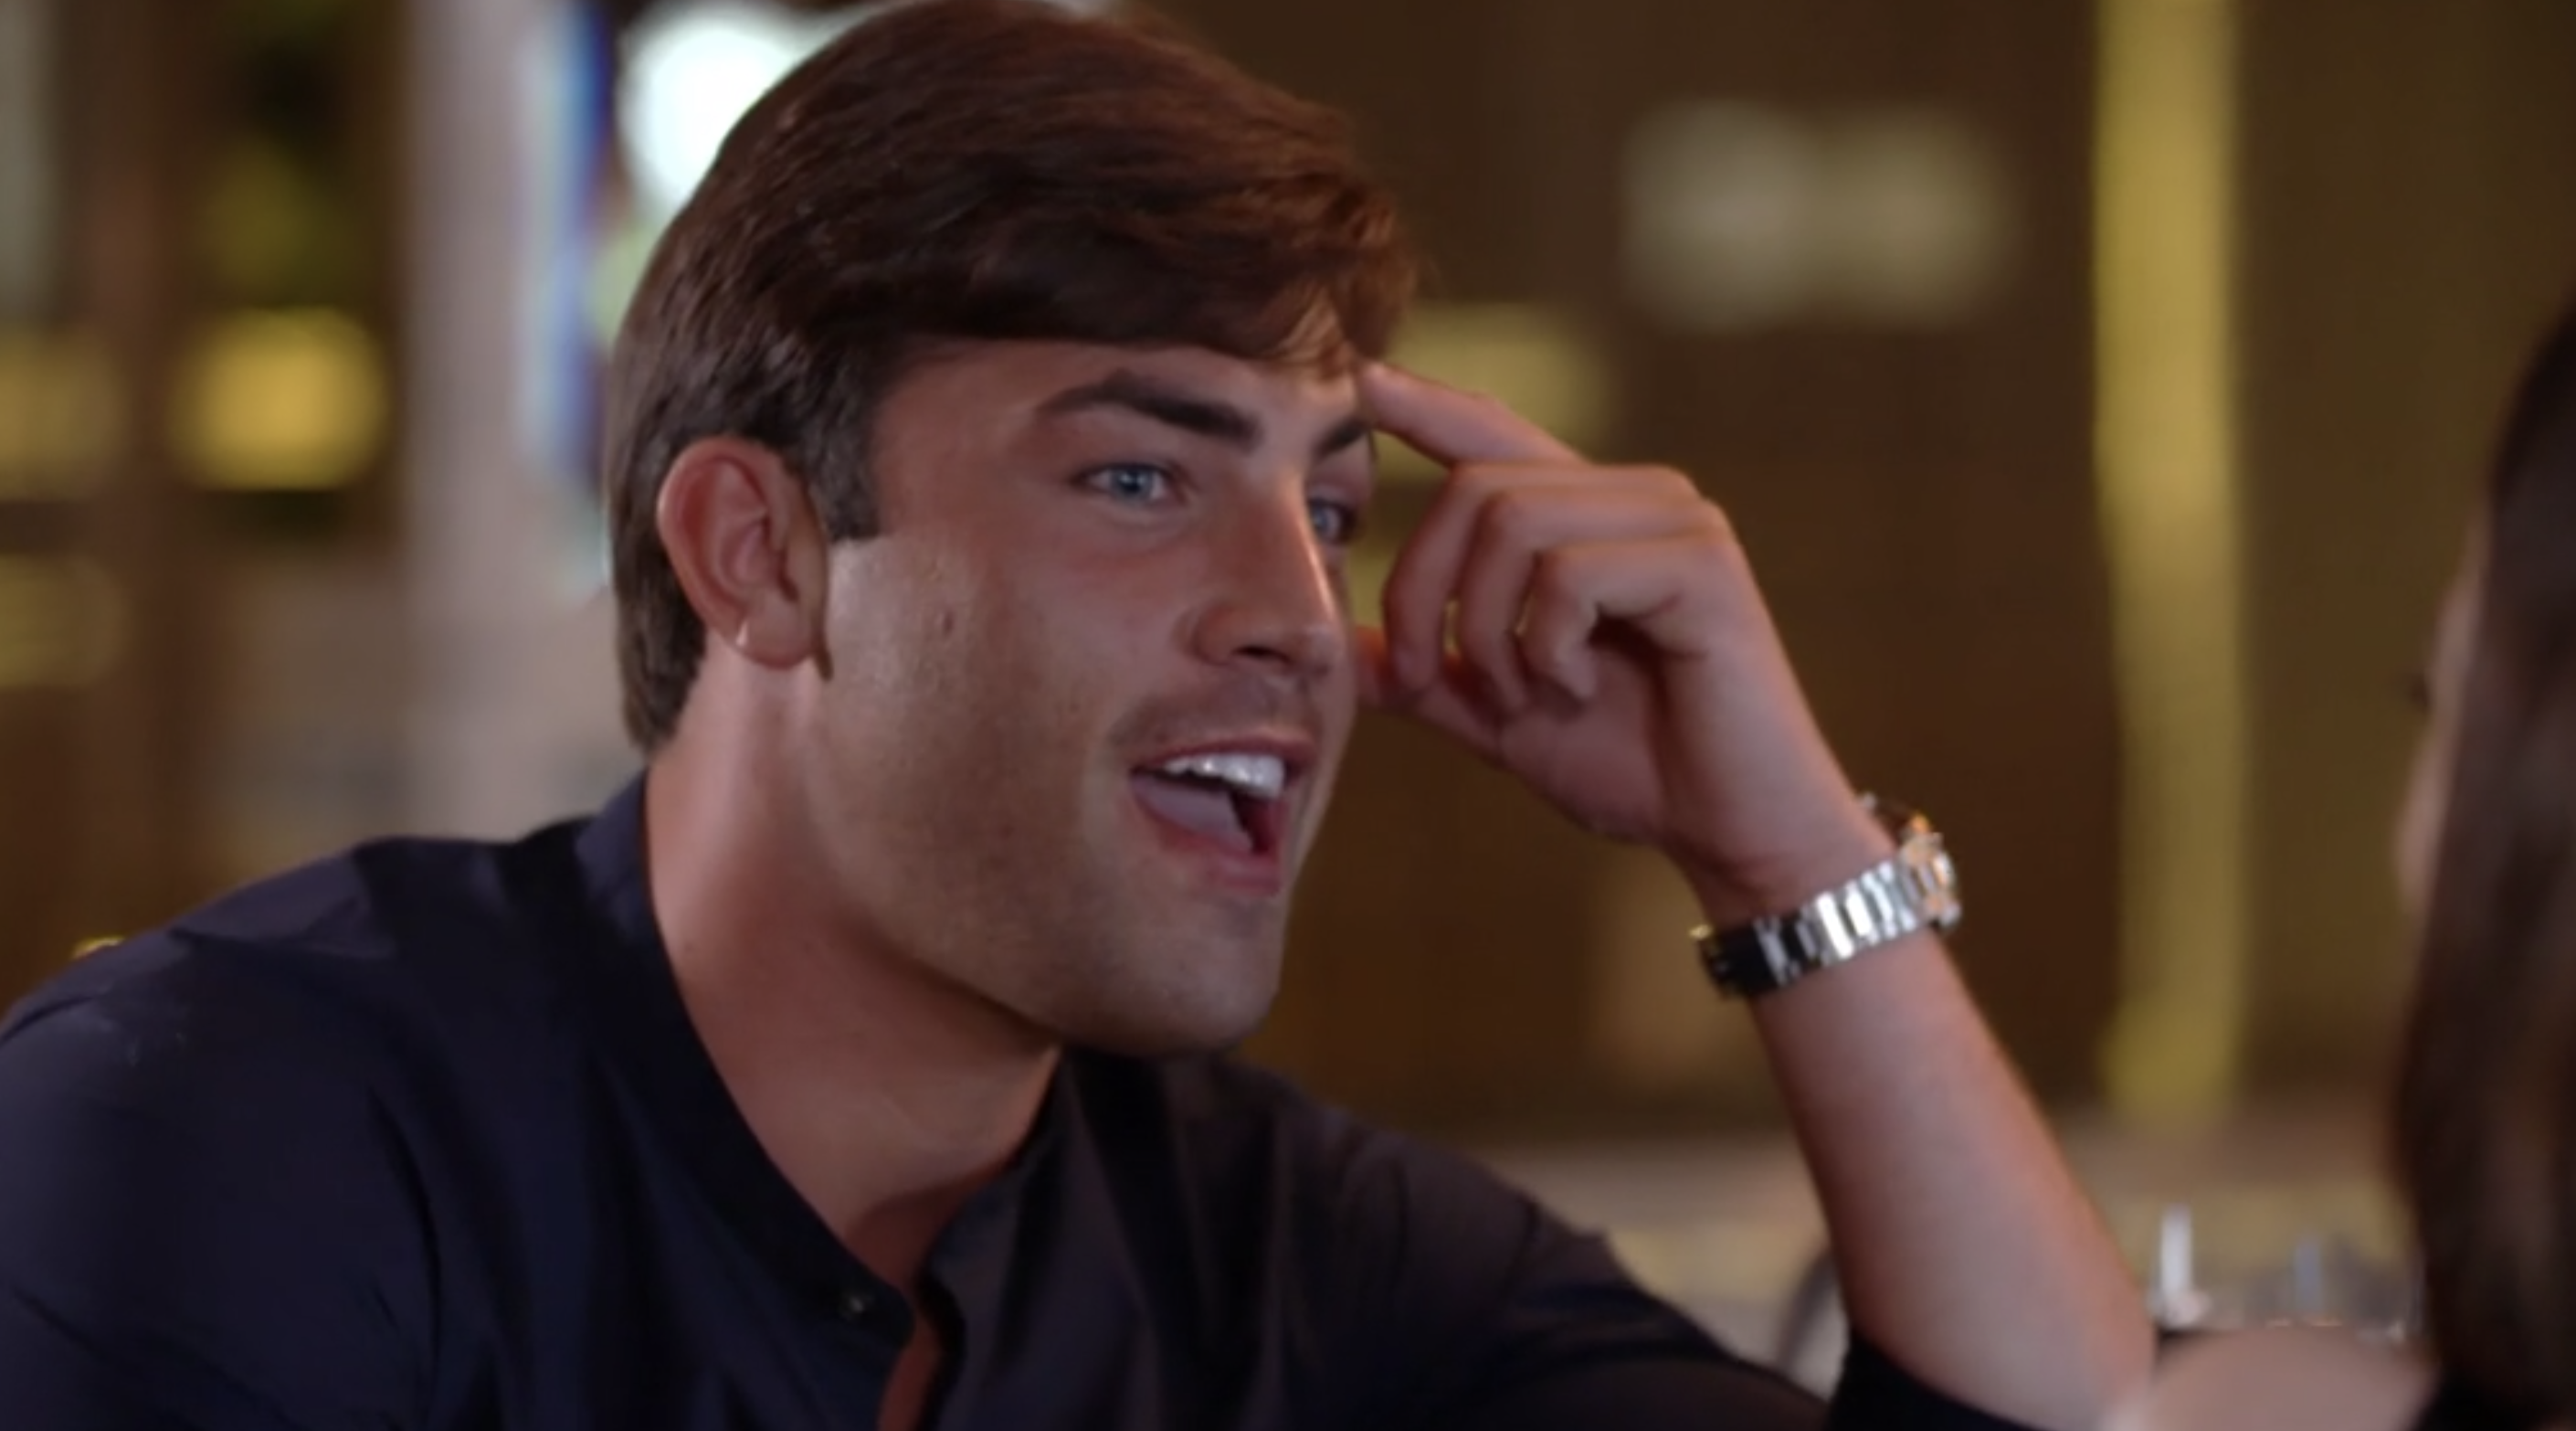 Celebs Go Dating fans think Jack Fincham is on cocaine